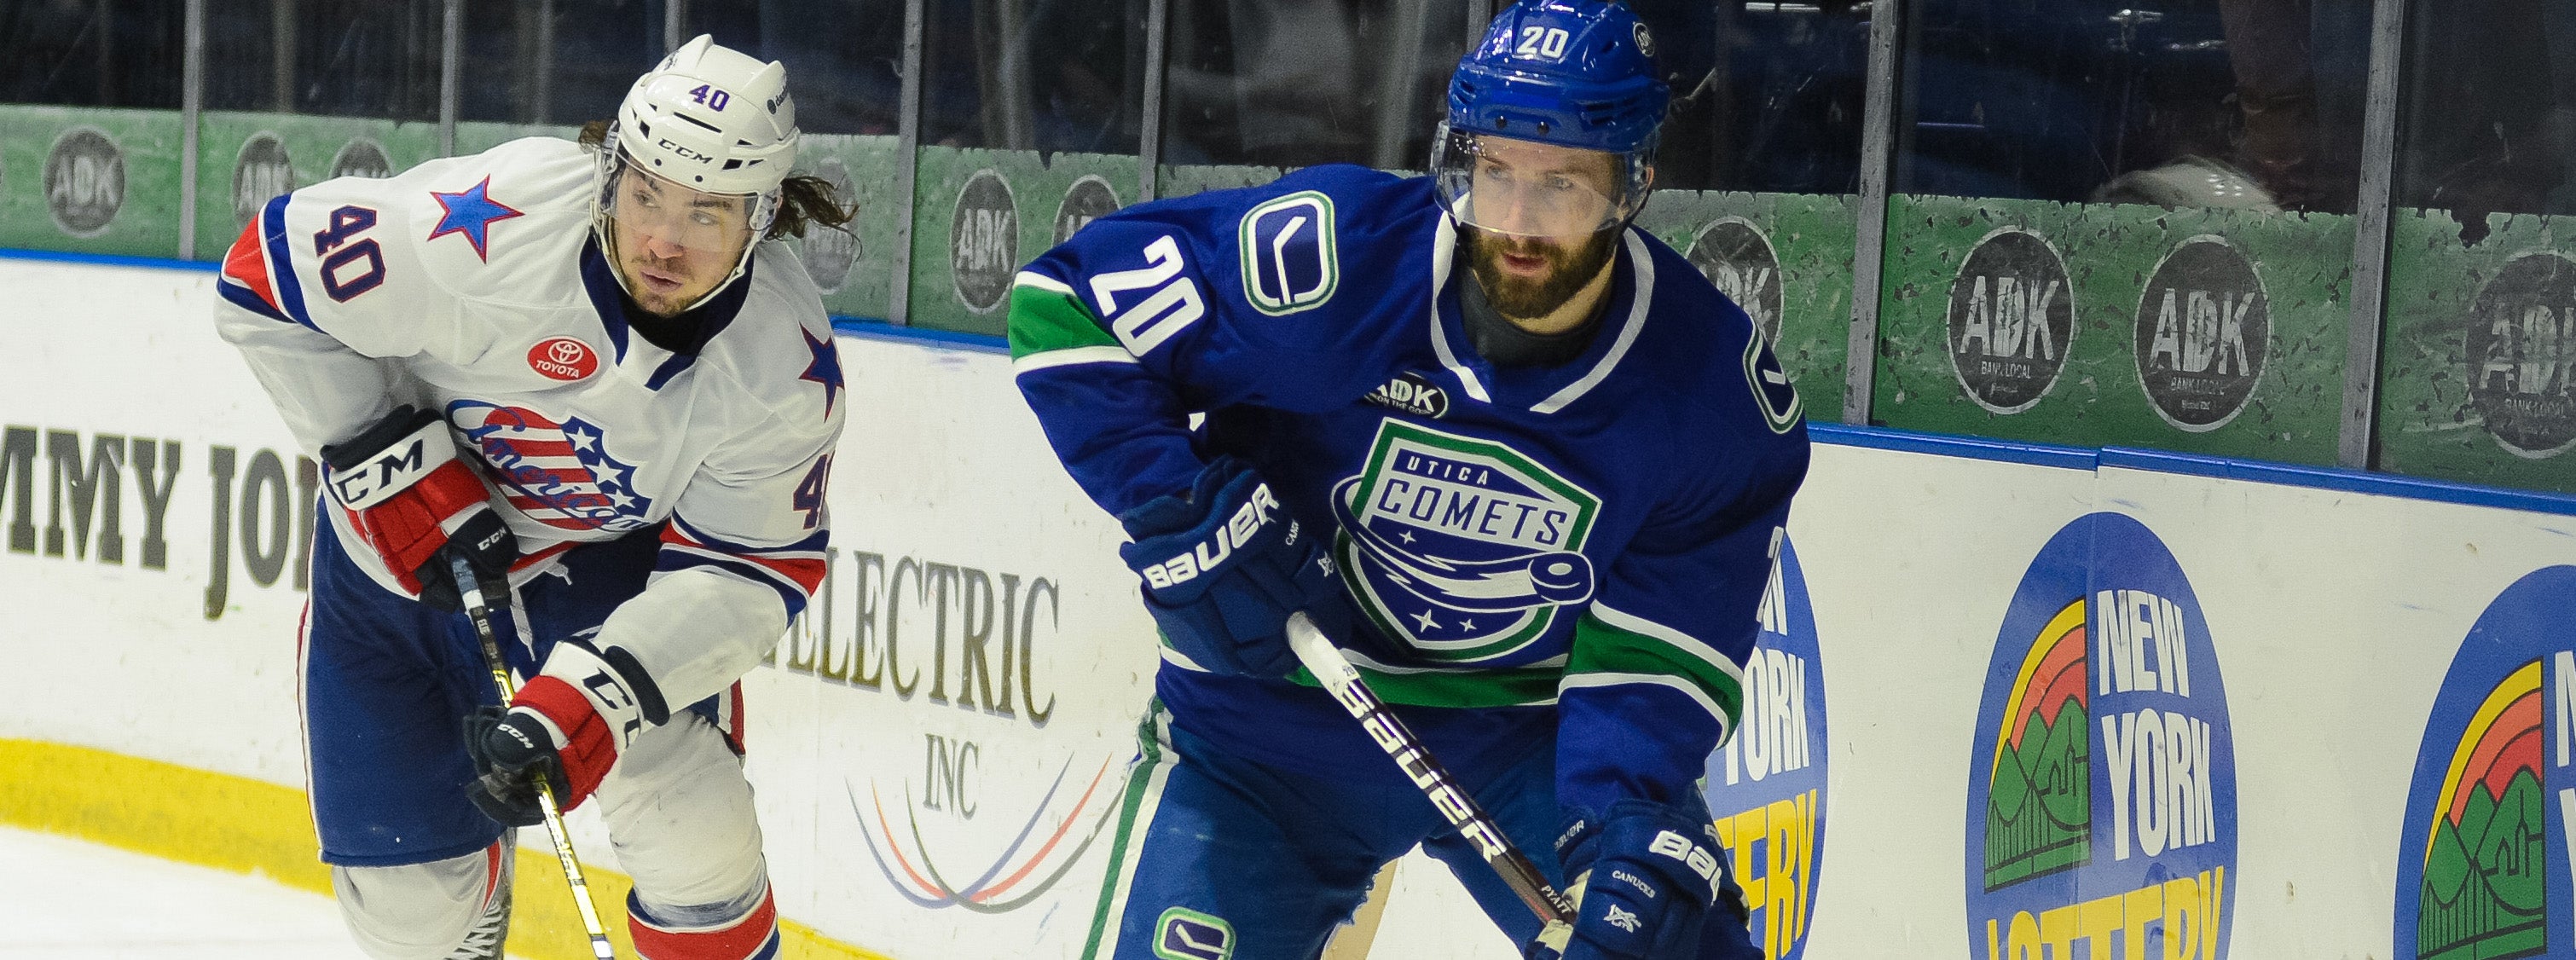 COMETS FACE AMERKS FOR FINAL TIME AT HOME